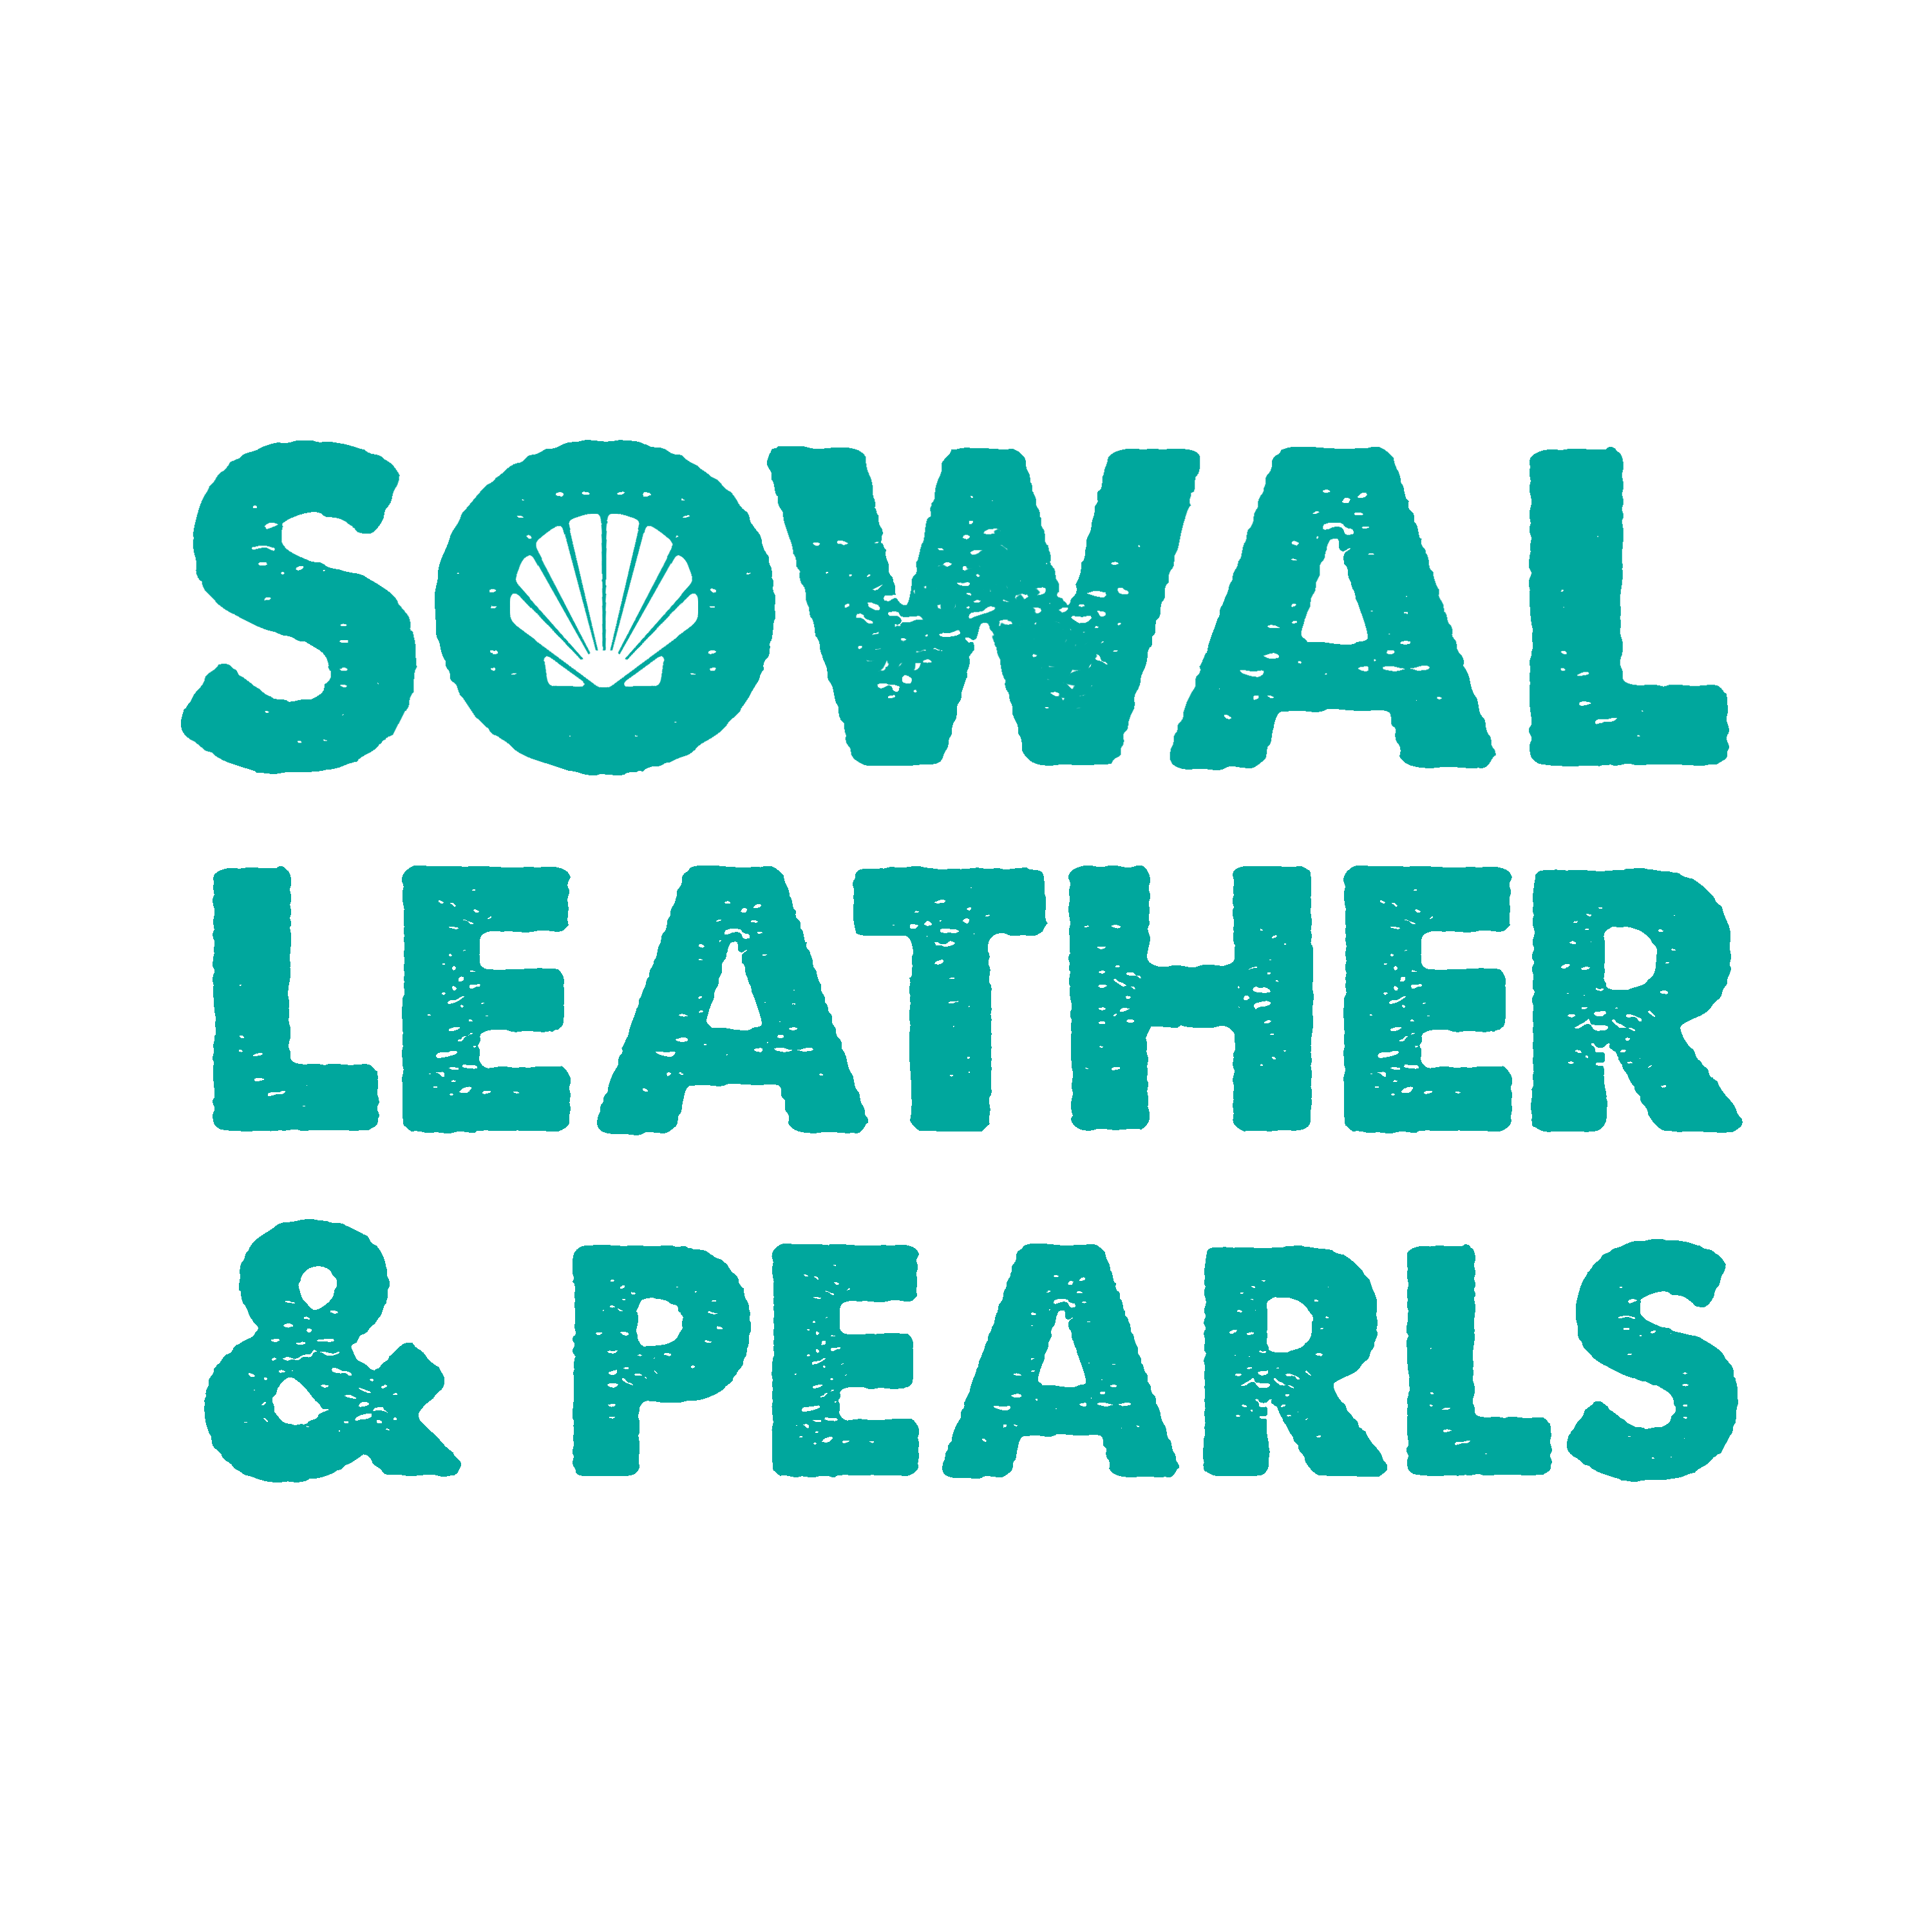 Locals since 1954!! Woman-owned handmade  jewelry business in South Walton, Florida. Check out our Facebook and Instagram sites! #sowalleatherandpearls